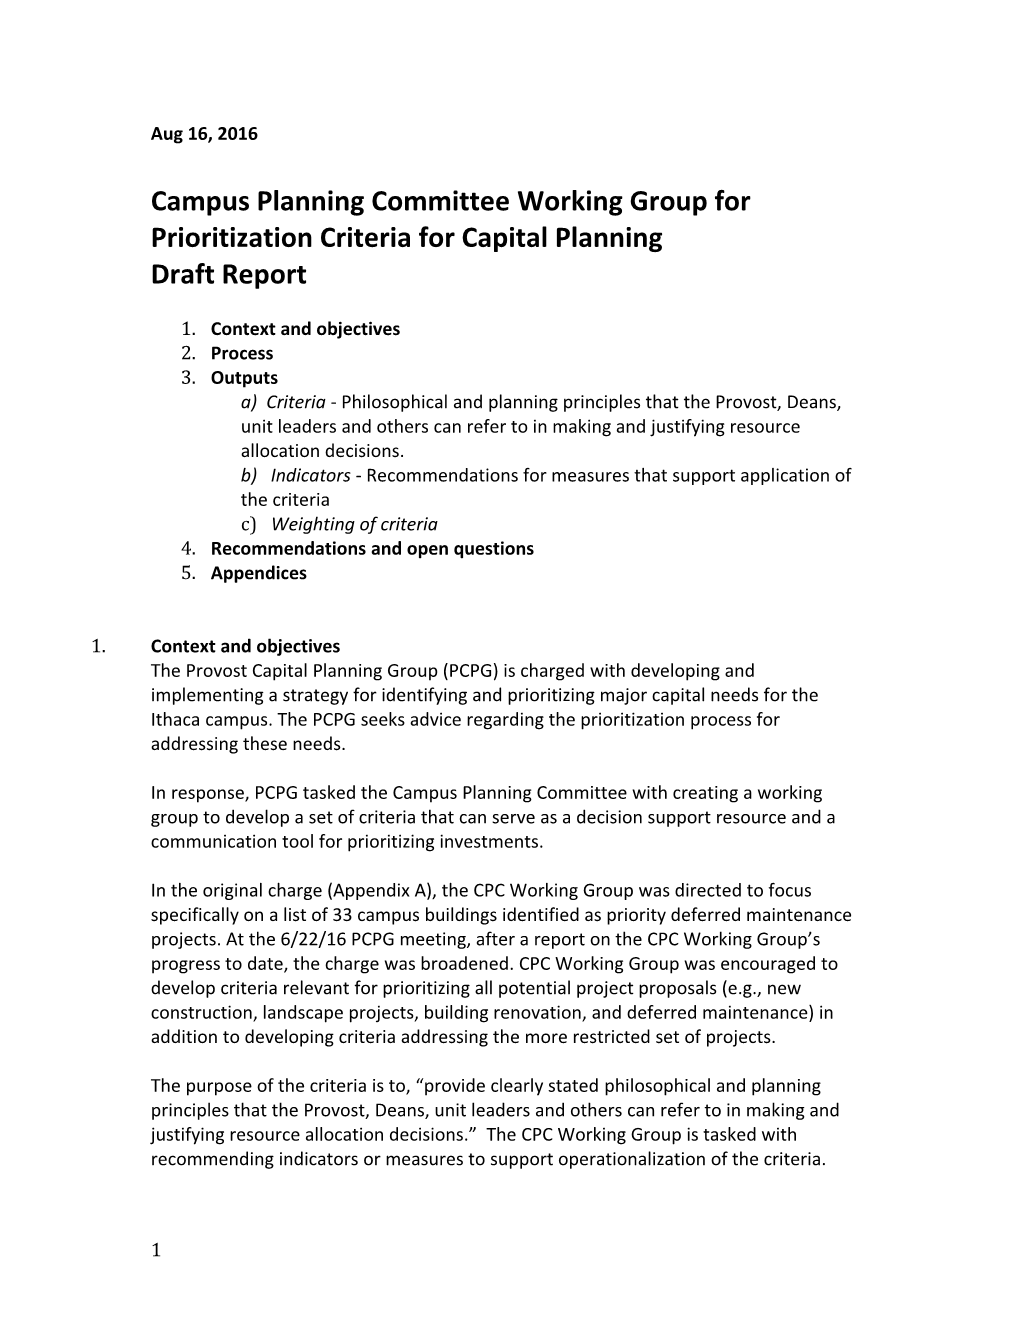 Campus Planning Committee Working Group for Prioritization Criteria for Capital Planning